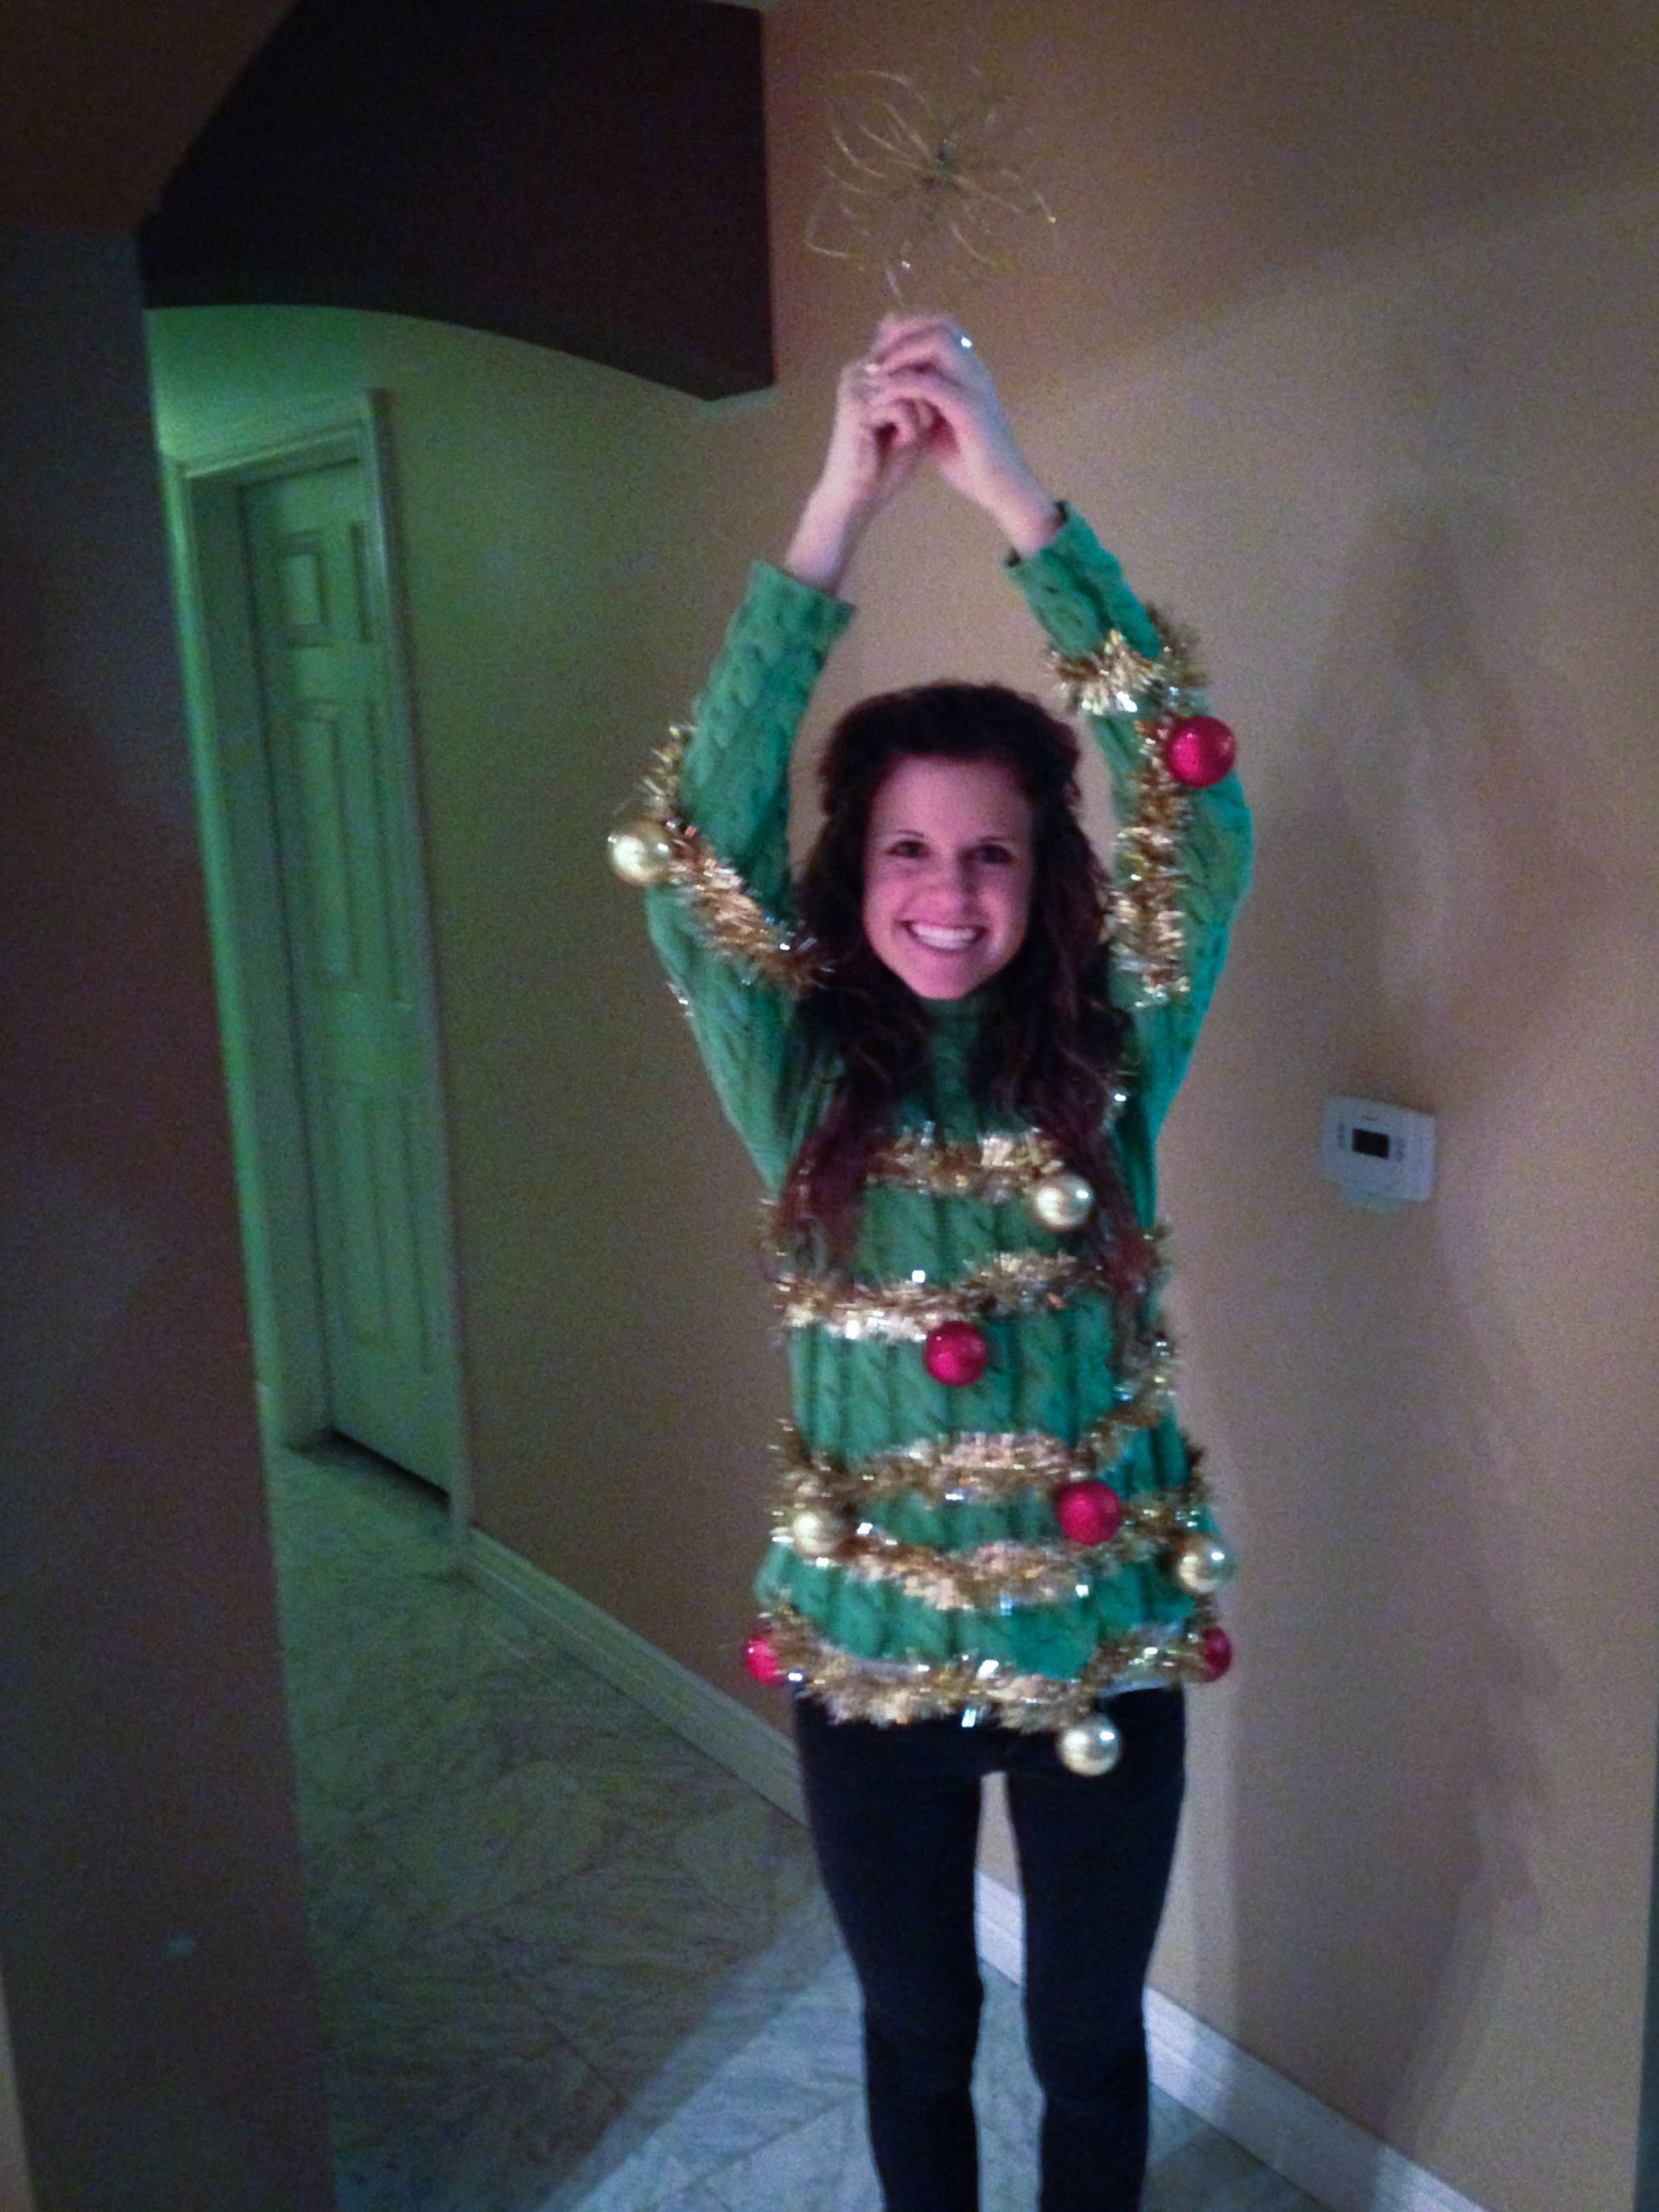 DIY Ugly Christmas Sweater
 DIY Ugly Sweater Ideas